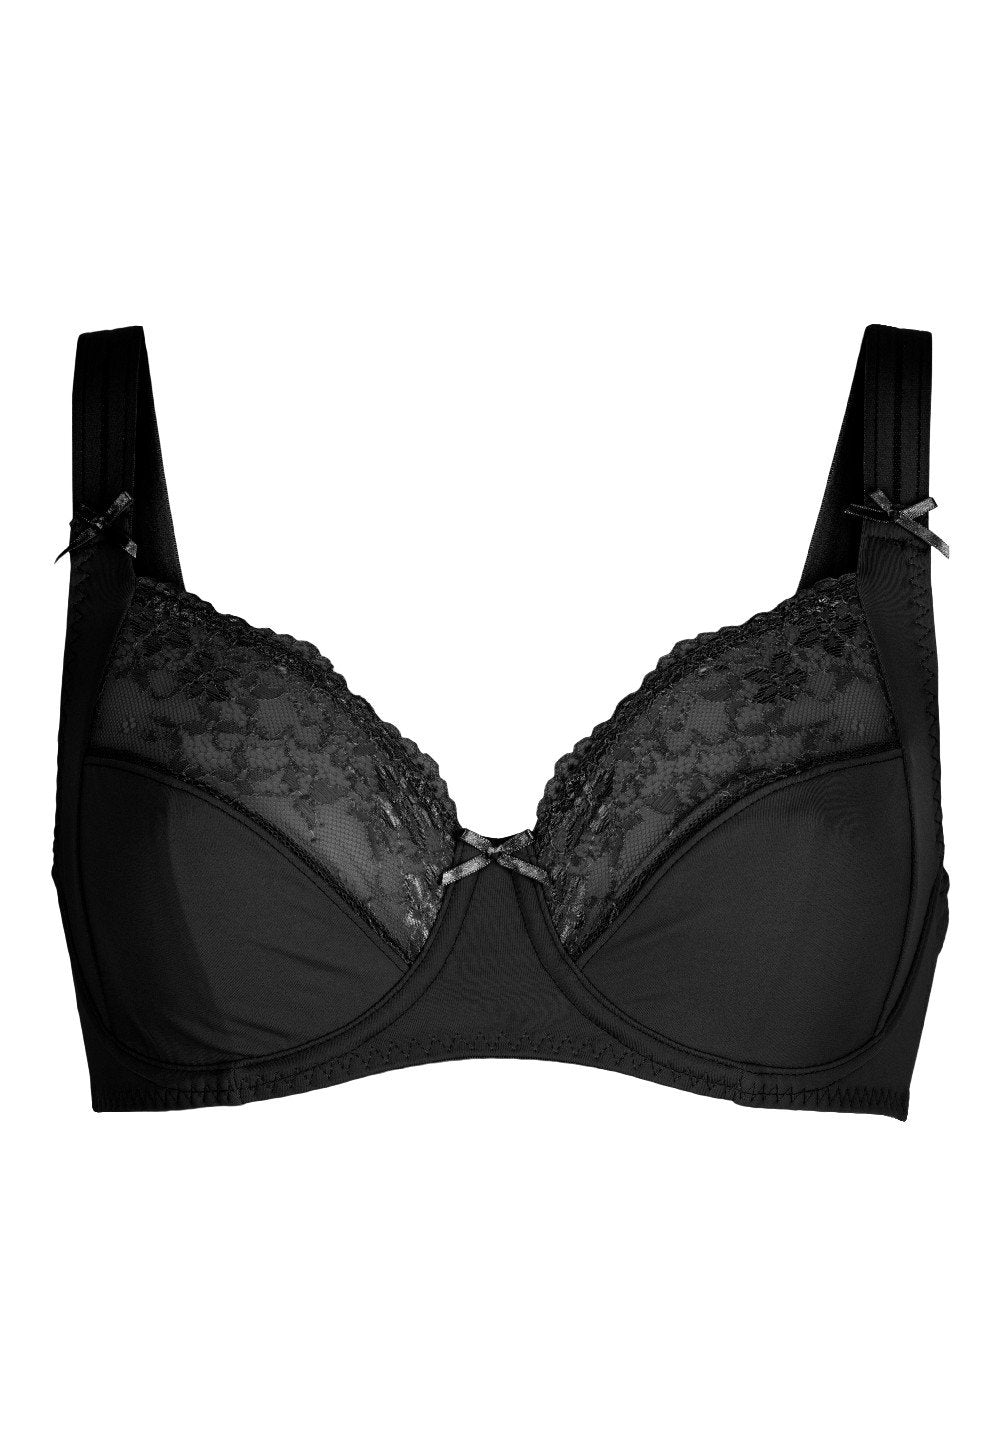 LingaDore DAILY underwired bra (90 B) - buy at Galaxus